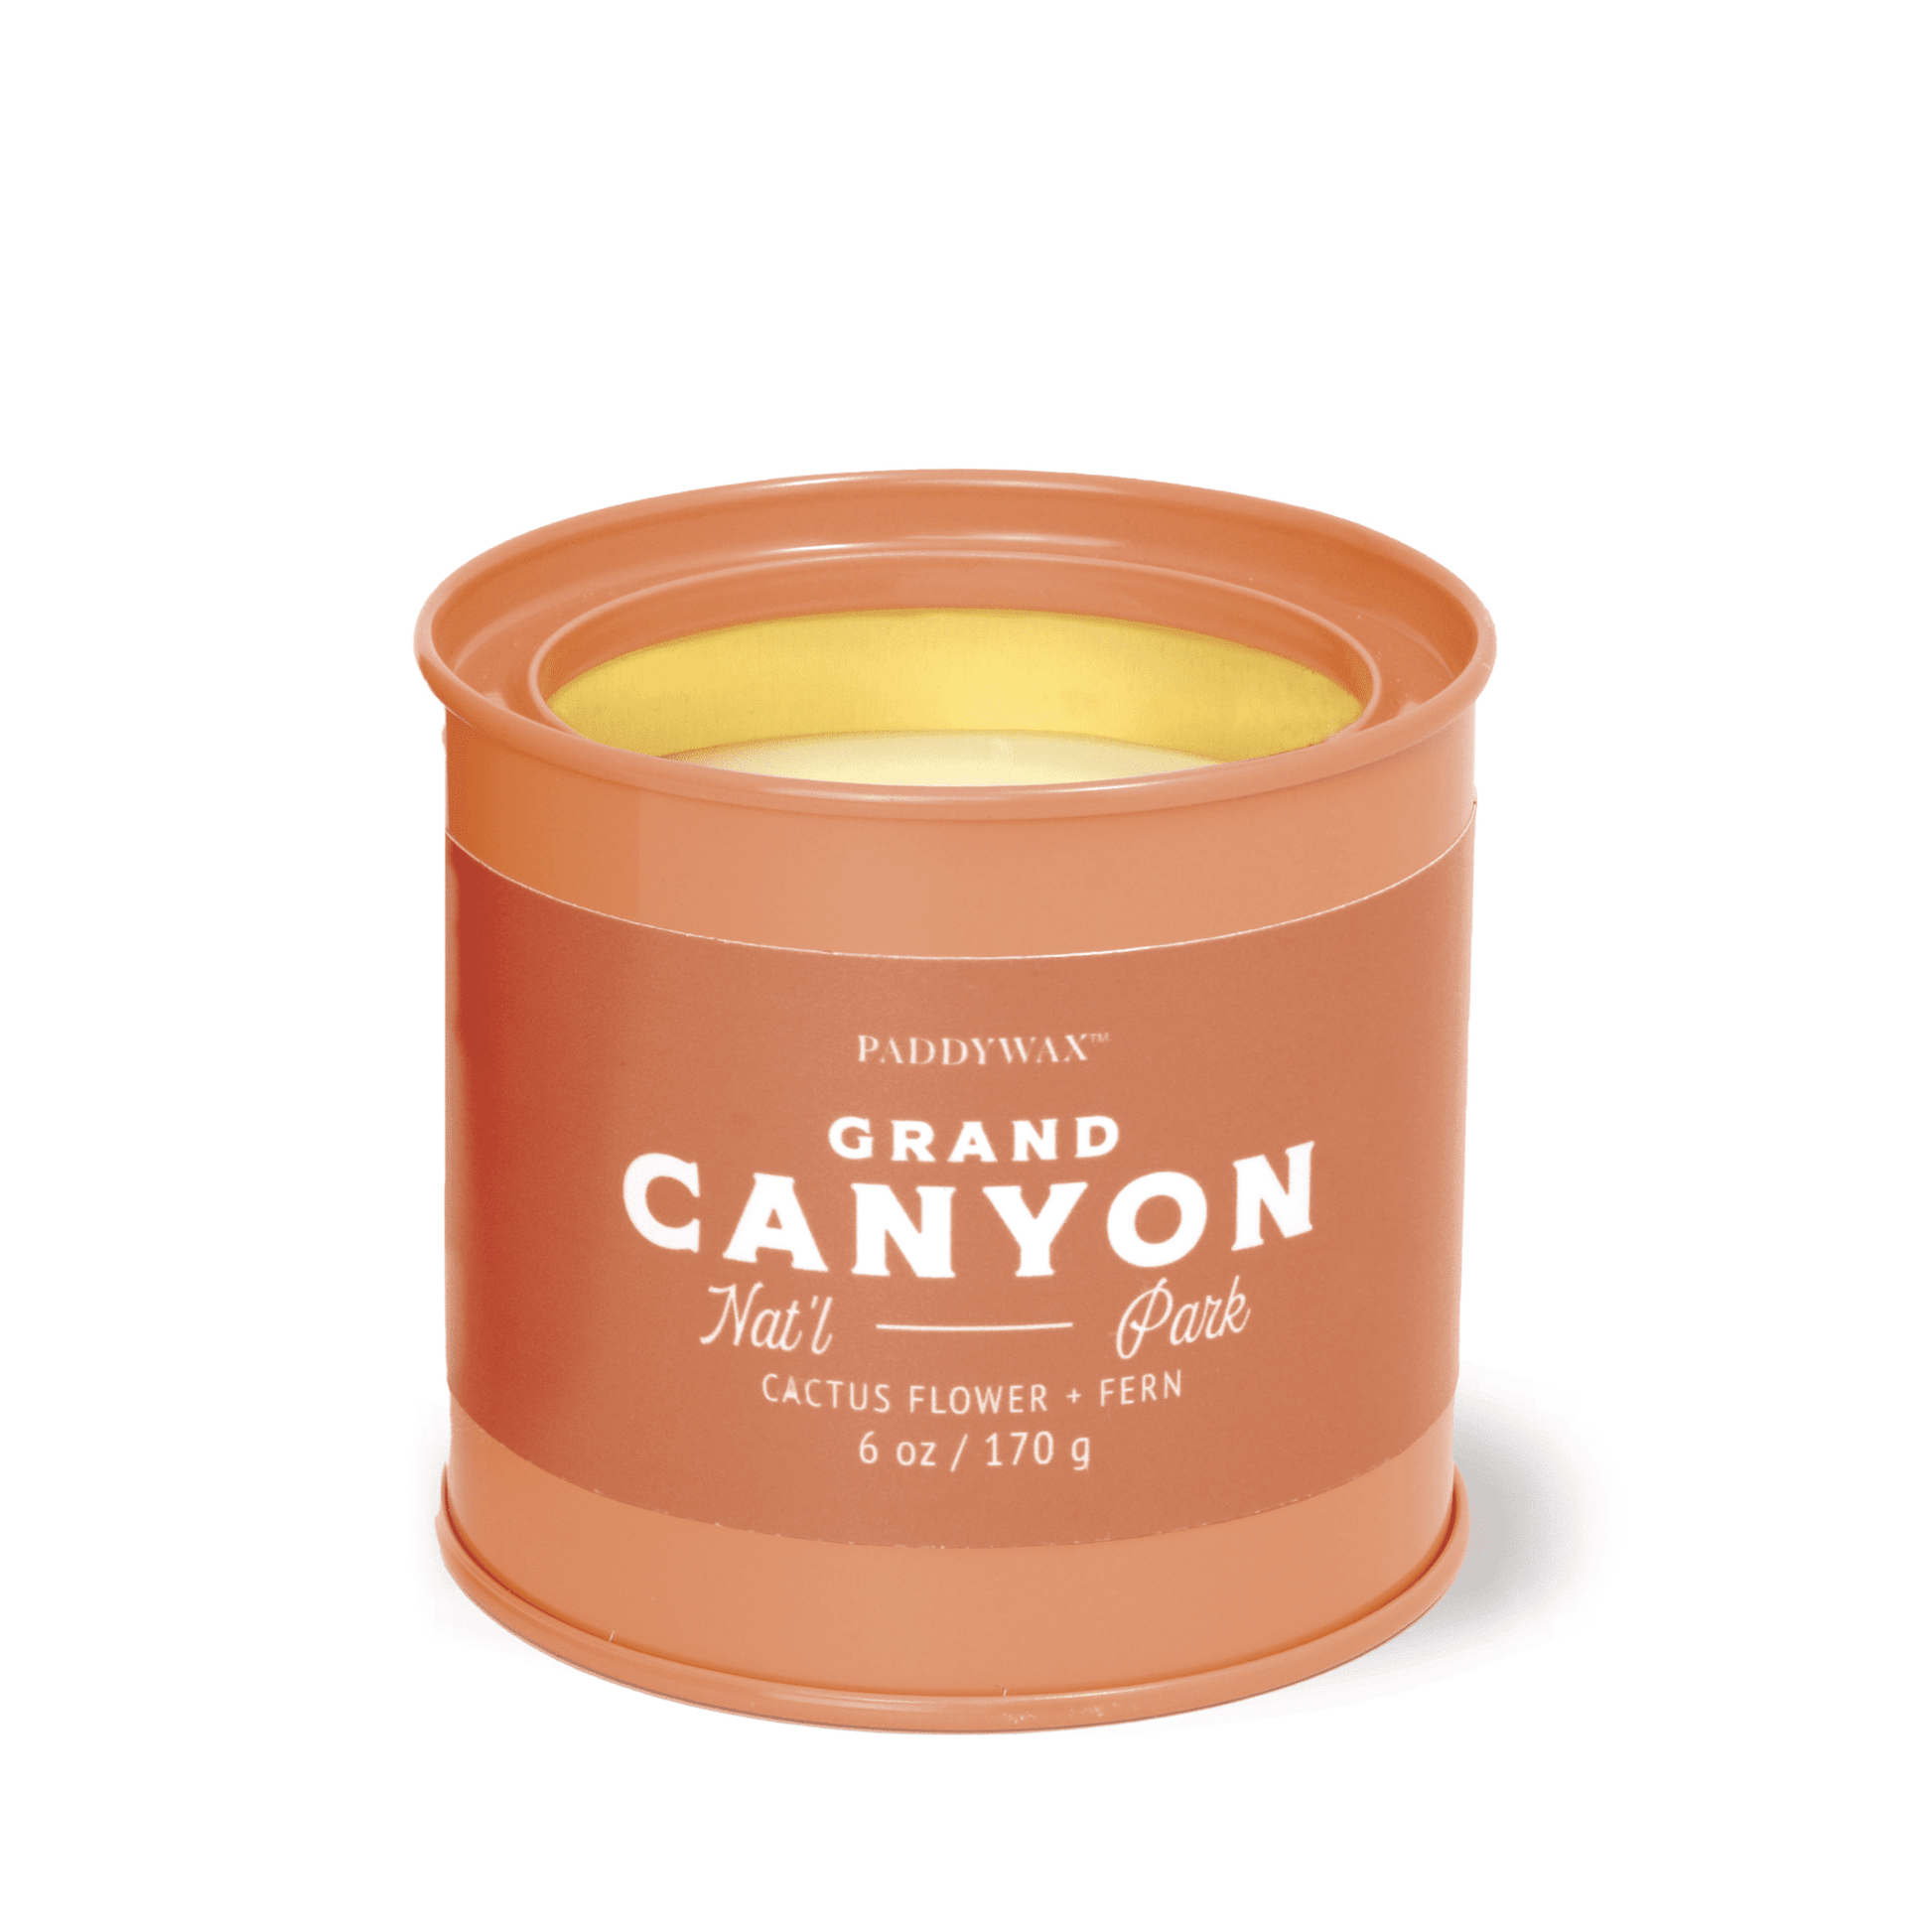 Grand Canyon Parks 6 oz tin candle on white background